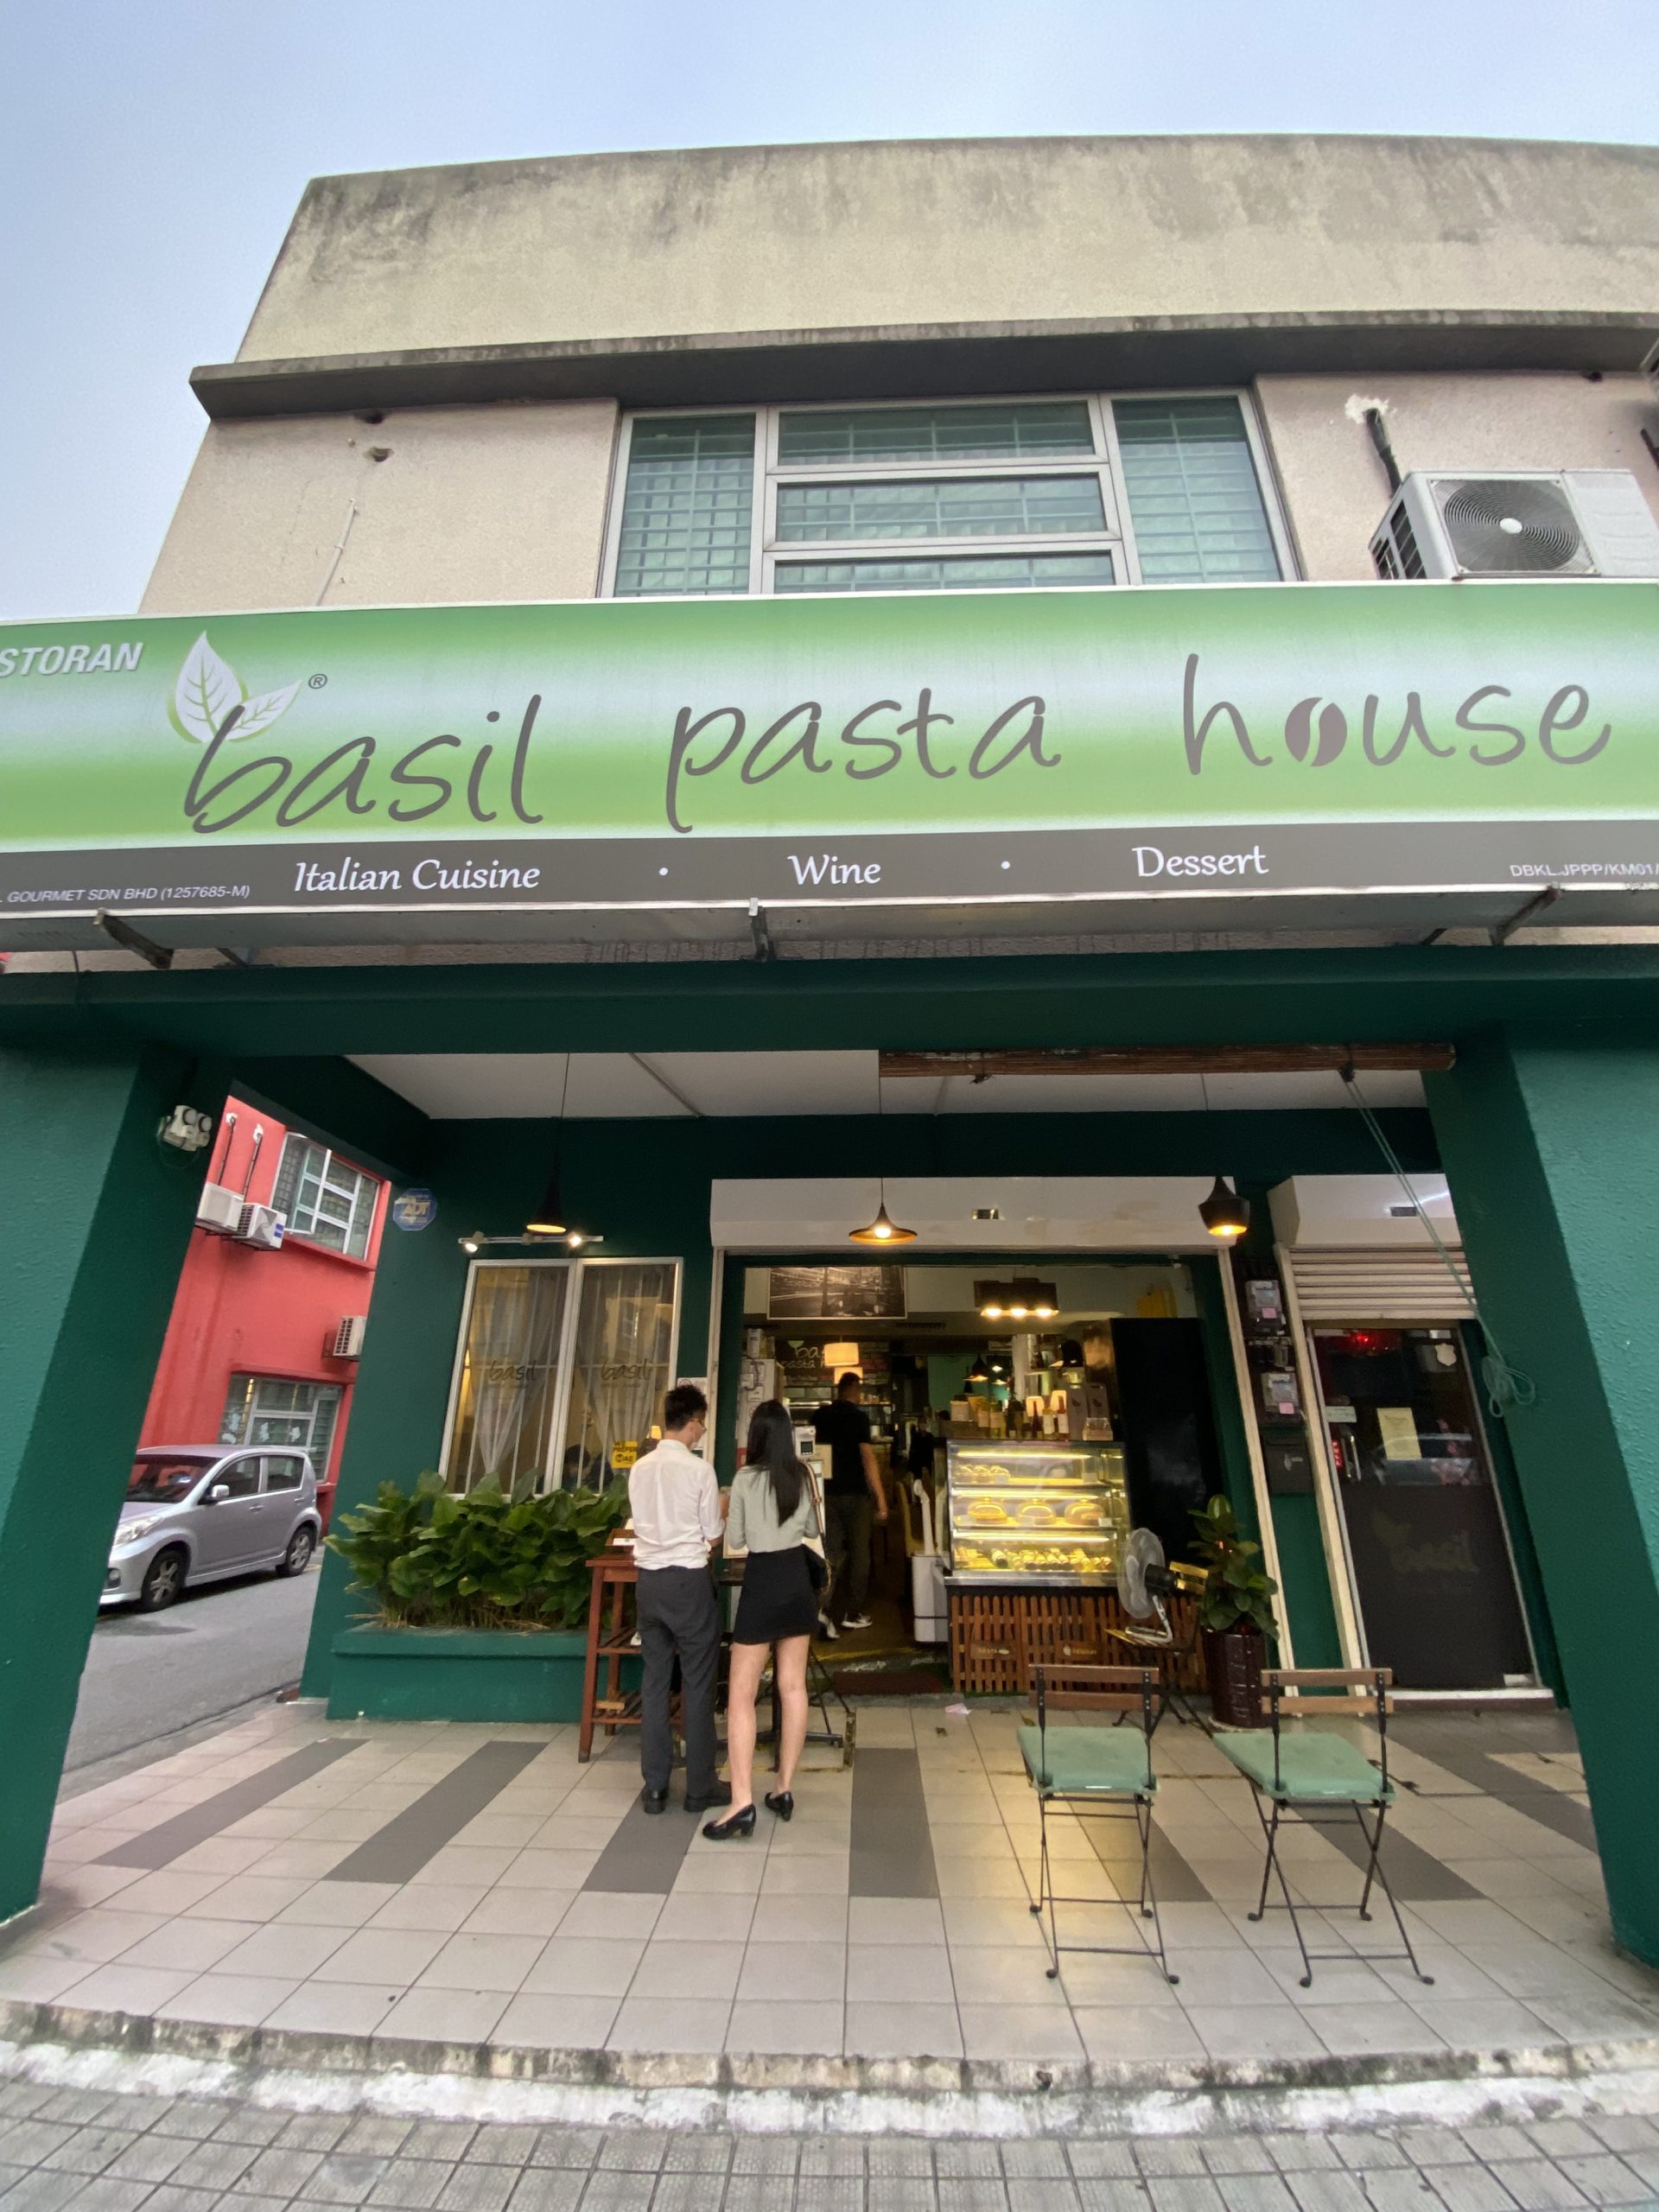 Basil pasta house: pastably the best in kuchai lama? This noodle-crazy editor definitely thinks so